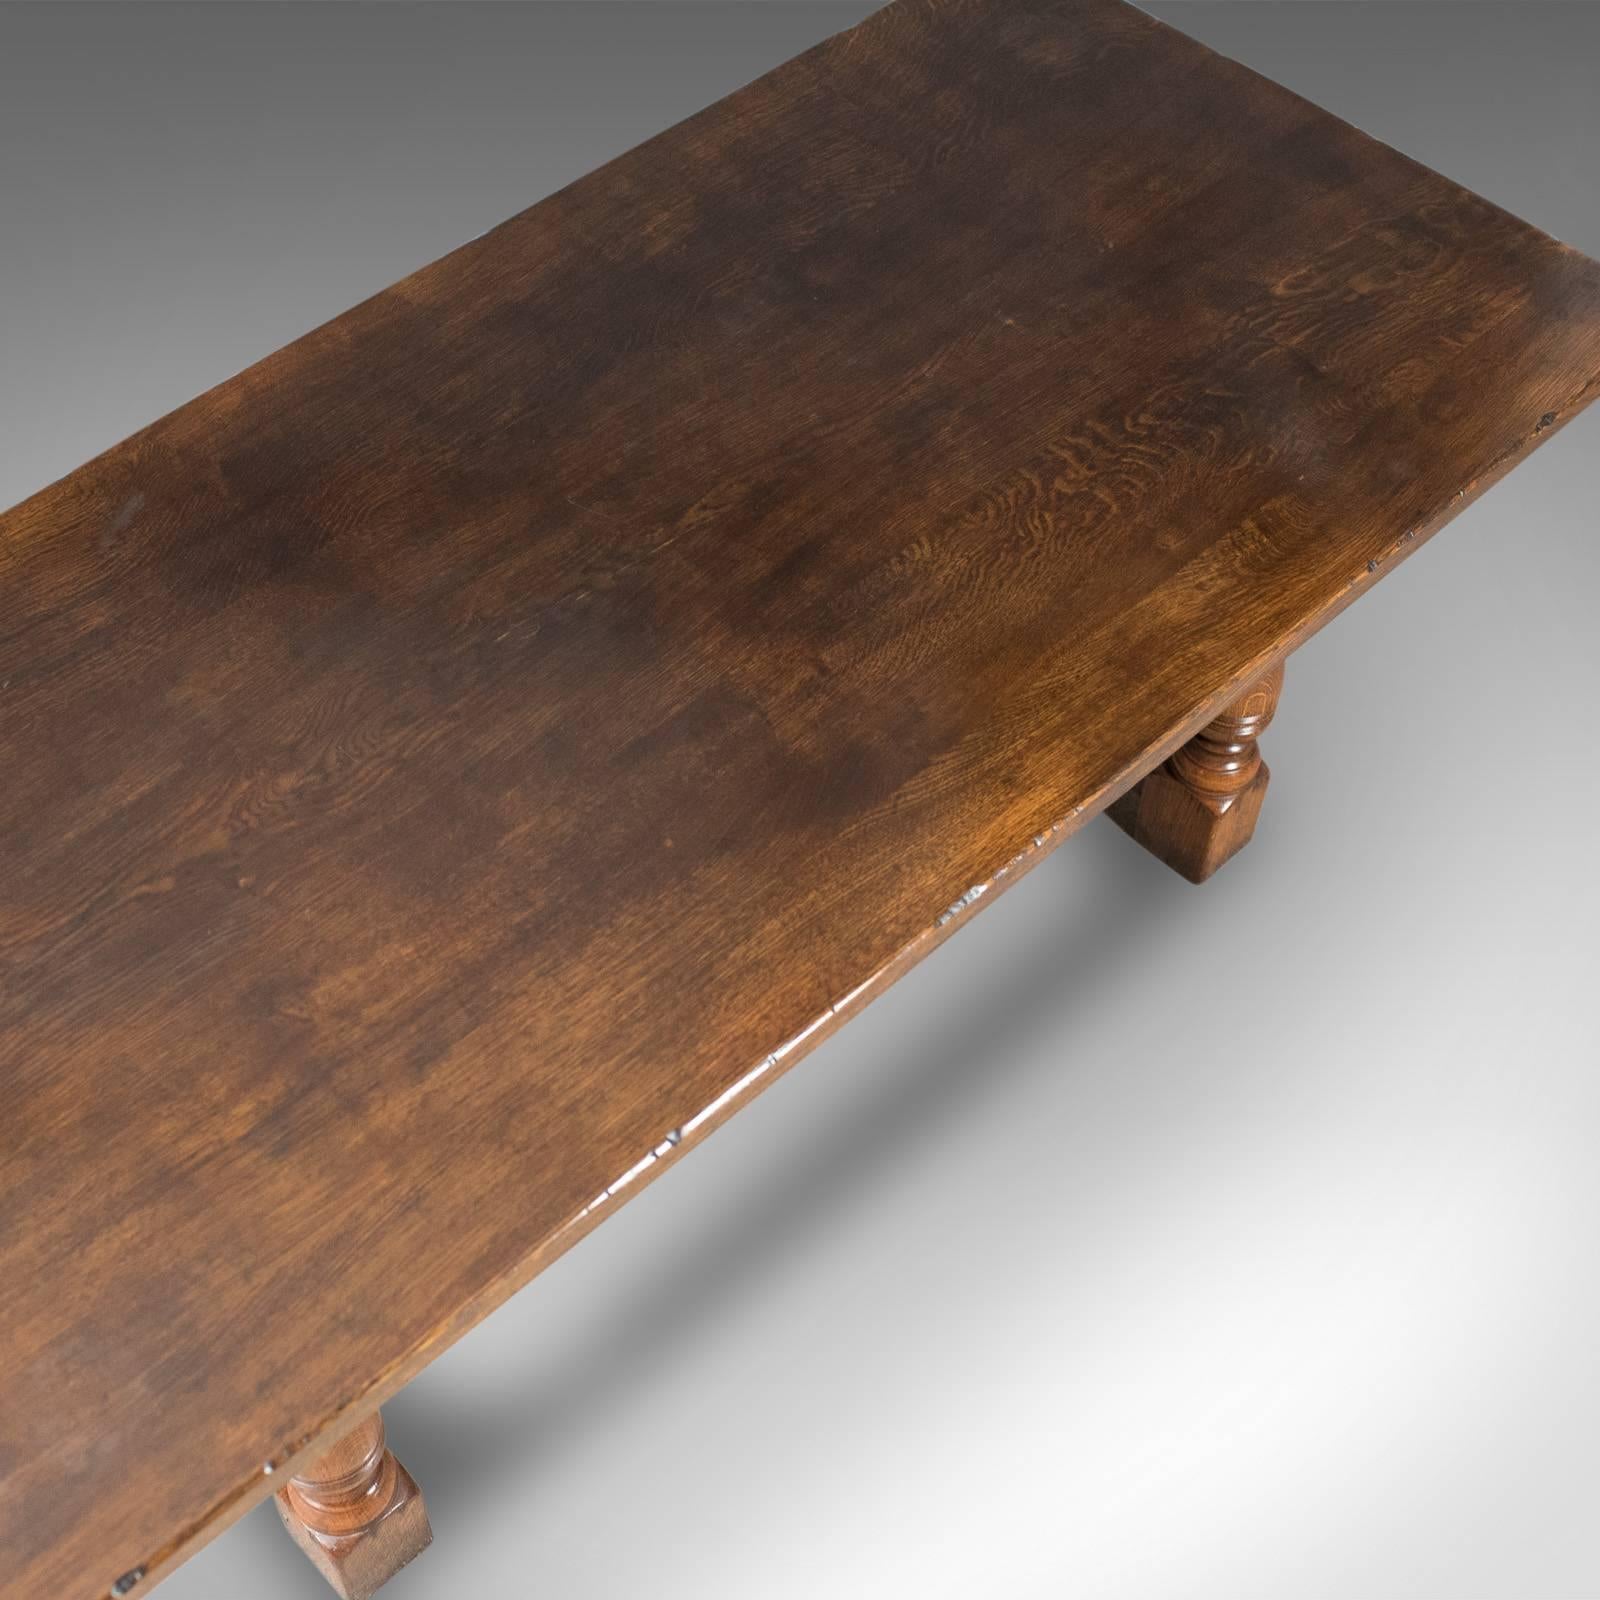 Six-Eight-Seat Oak Refectory Table, 17th Century Revival, Late 20th Century 1